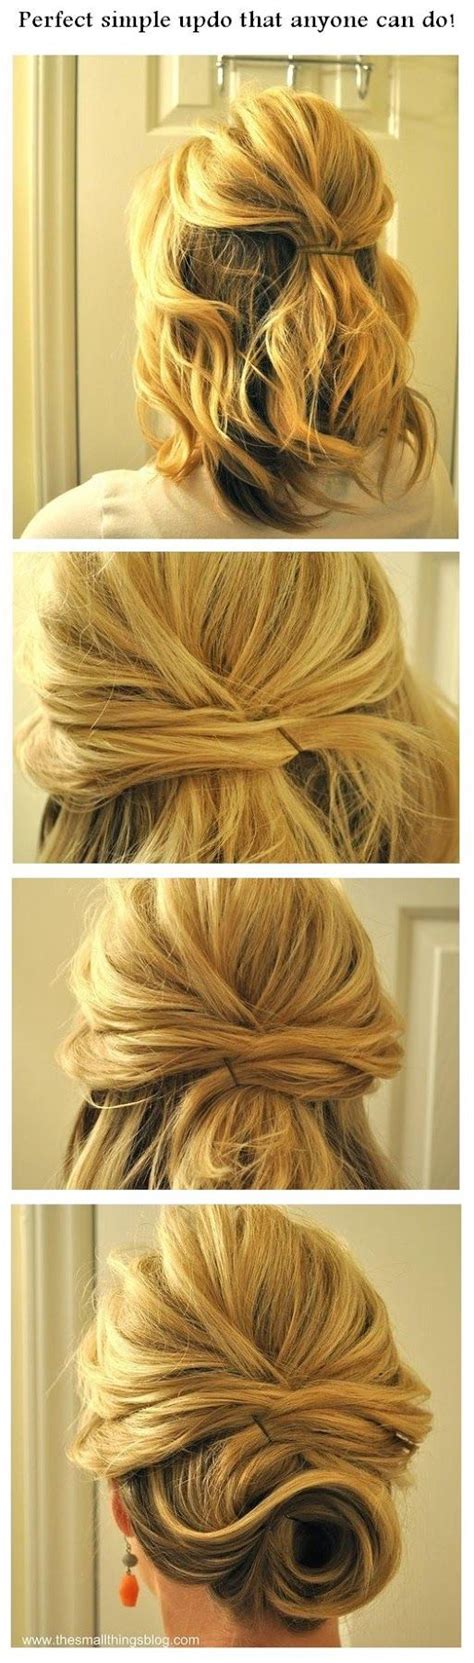 Picture of quick diy rolled braid updo for short hair 3 easy summer hairstyles luxy hair. 10+ images about Do It Yourself Updos on Pinterest | Updo ...